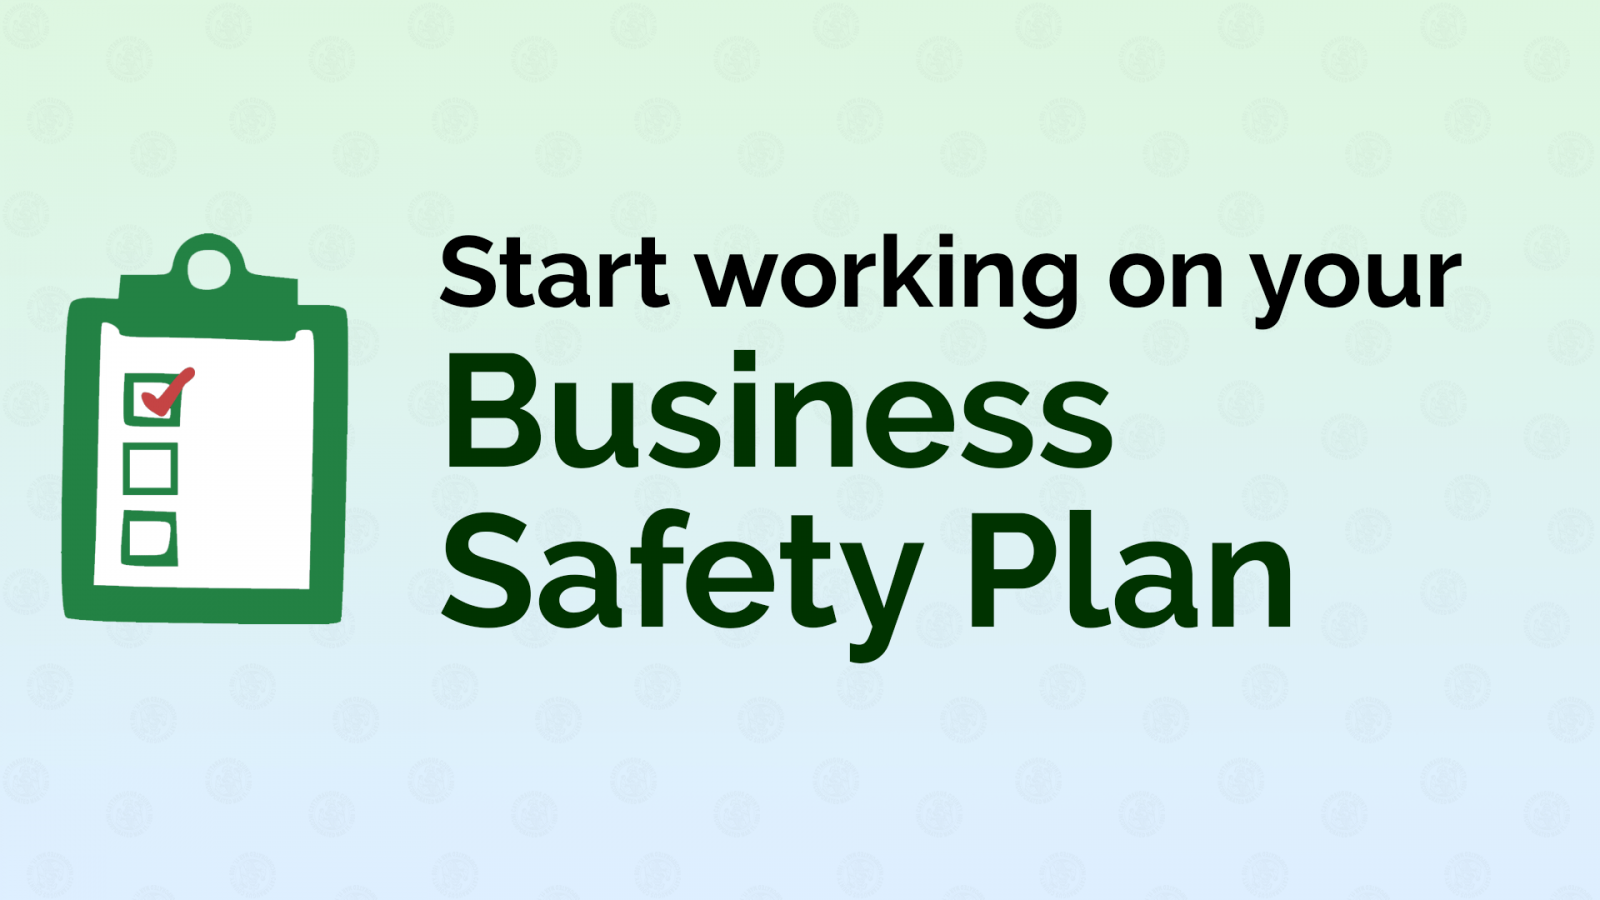 Start working on your Business Safety Plan